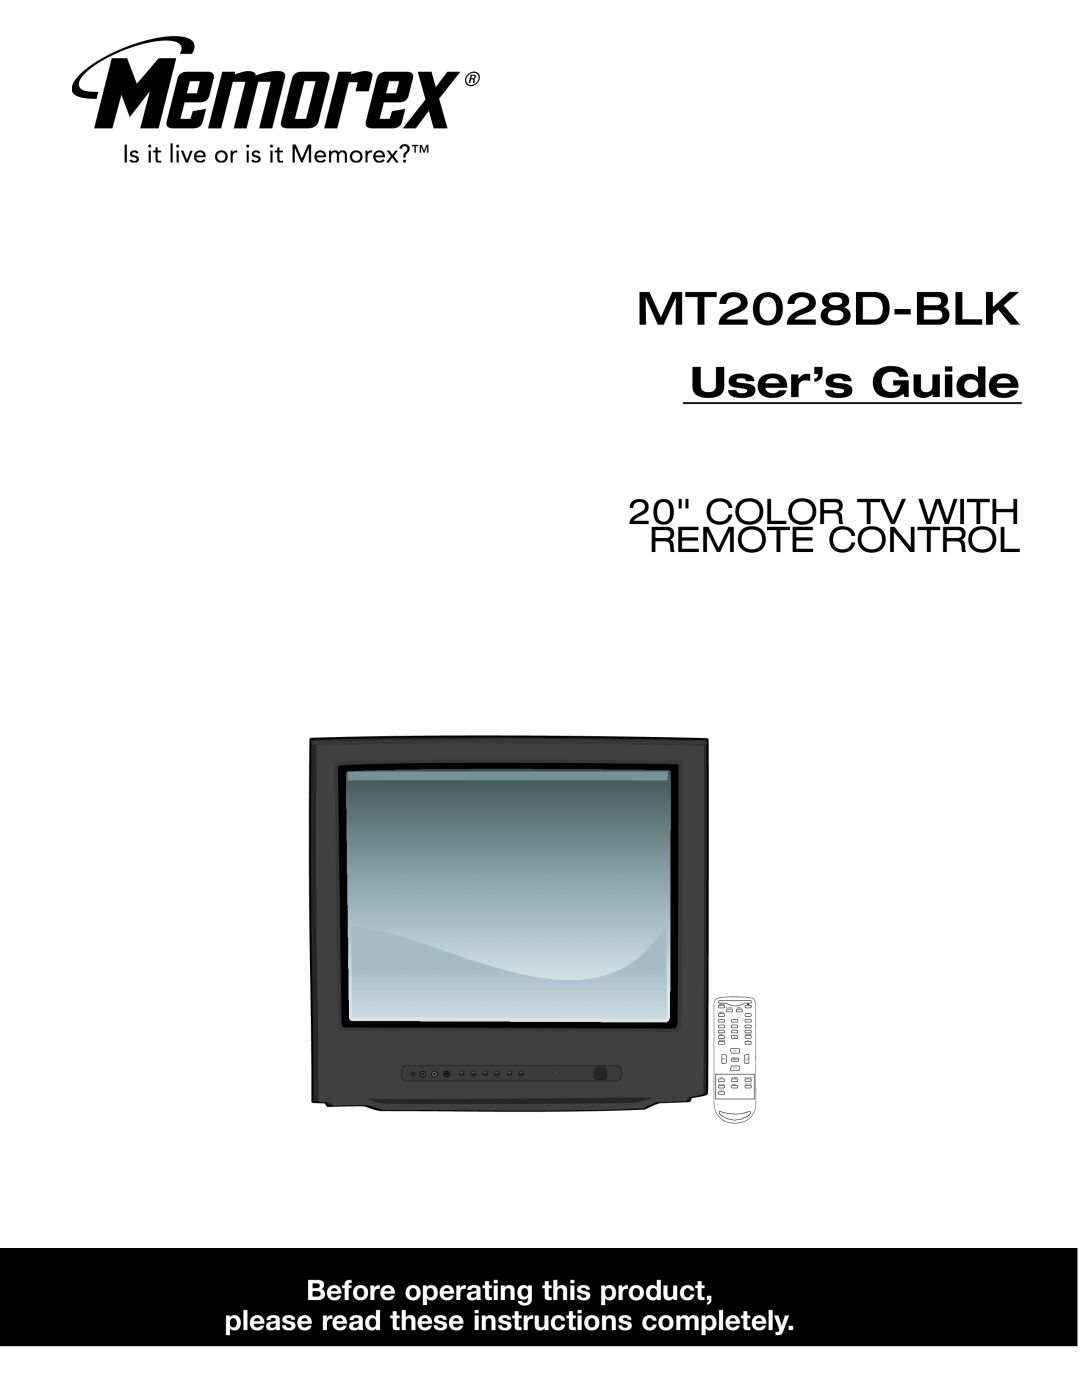 Memorex MT2028D-BLK manual User’s Guide, Color Tv With Remote Control, Before operating this product 